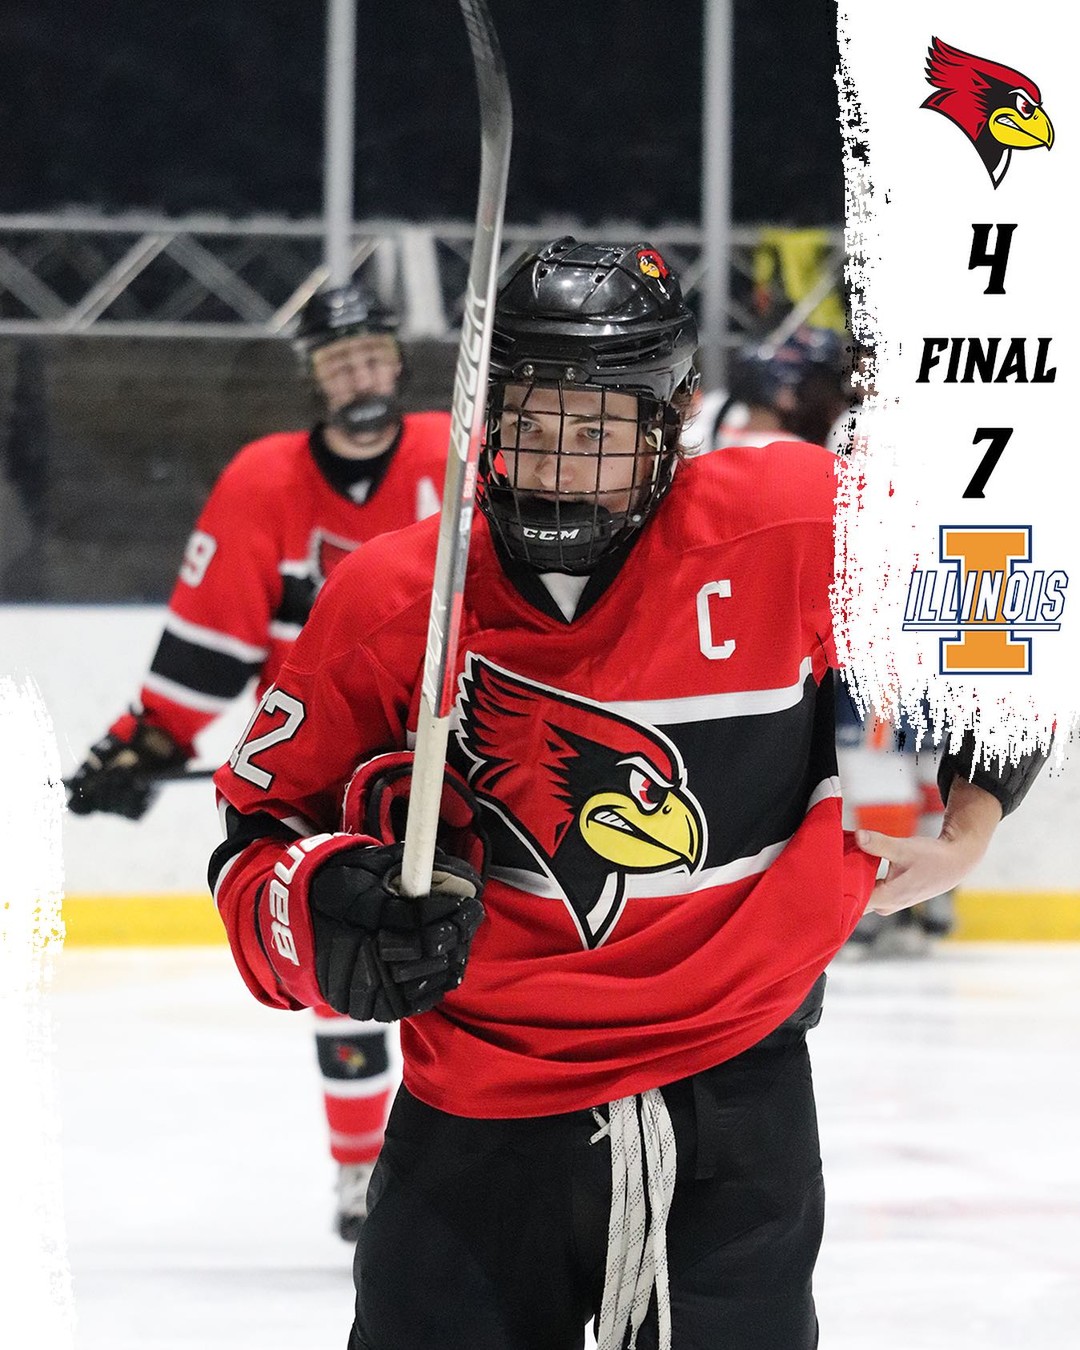 Final. D1 falls short against the Illini at home. They look to get redemption tomorrow in Champaign.

#hereforgood #rollbirds